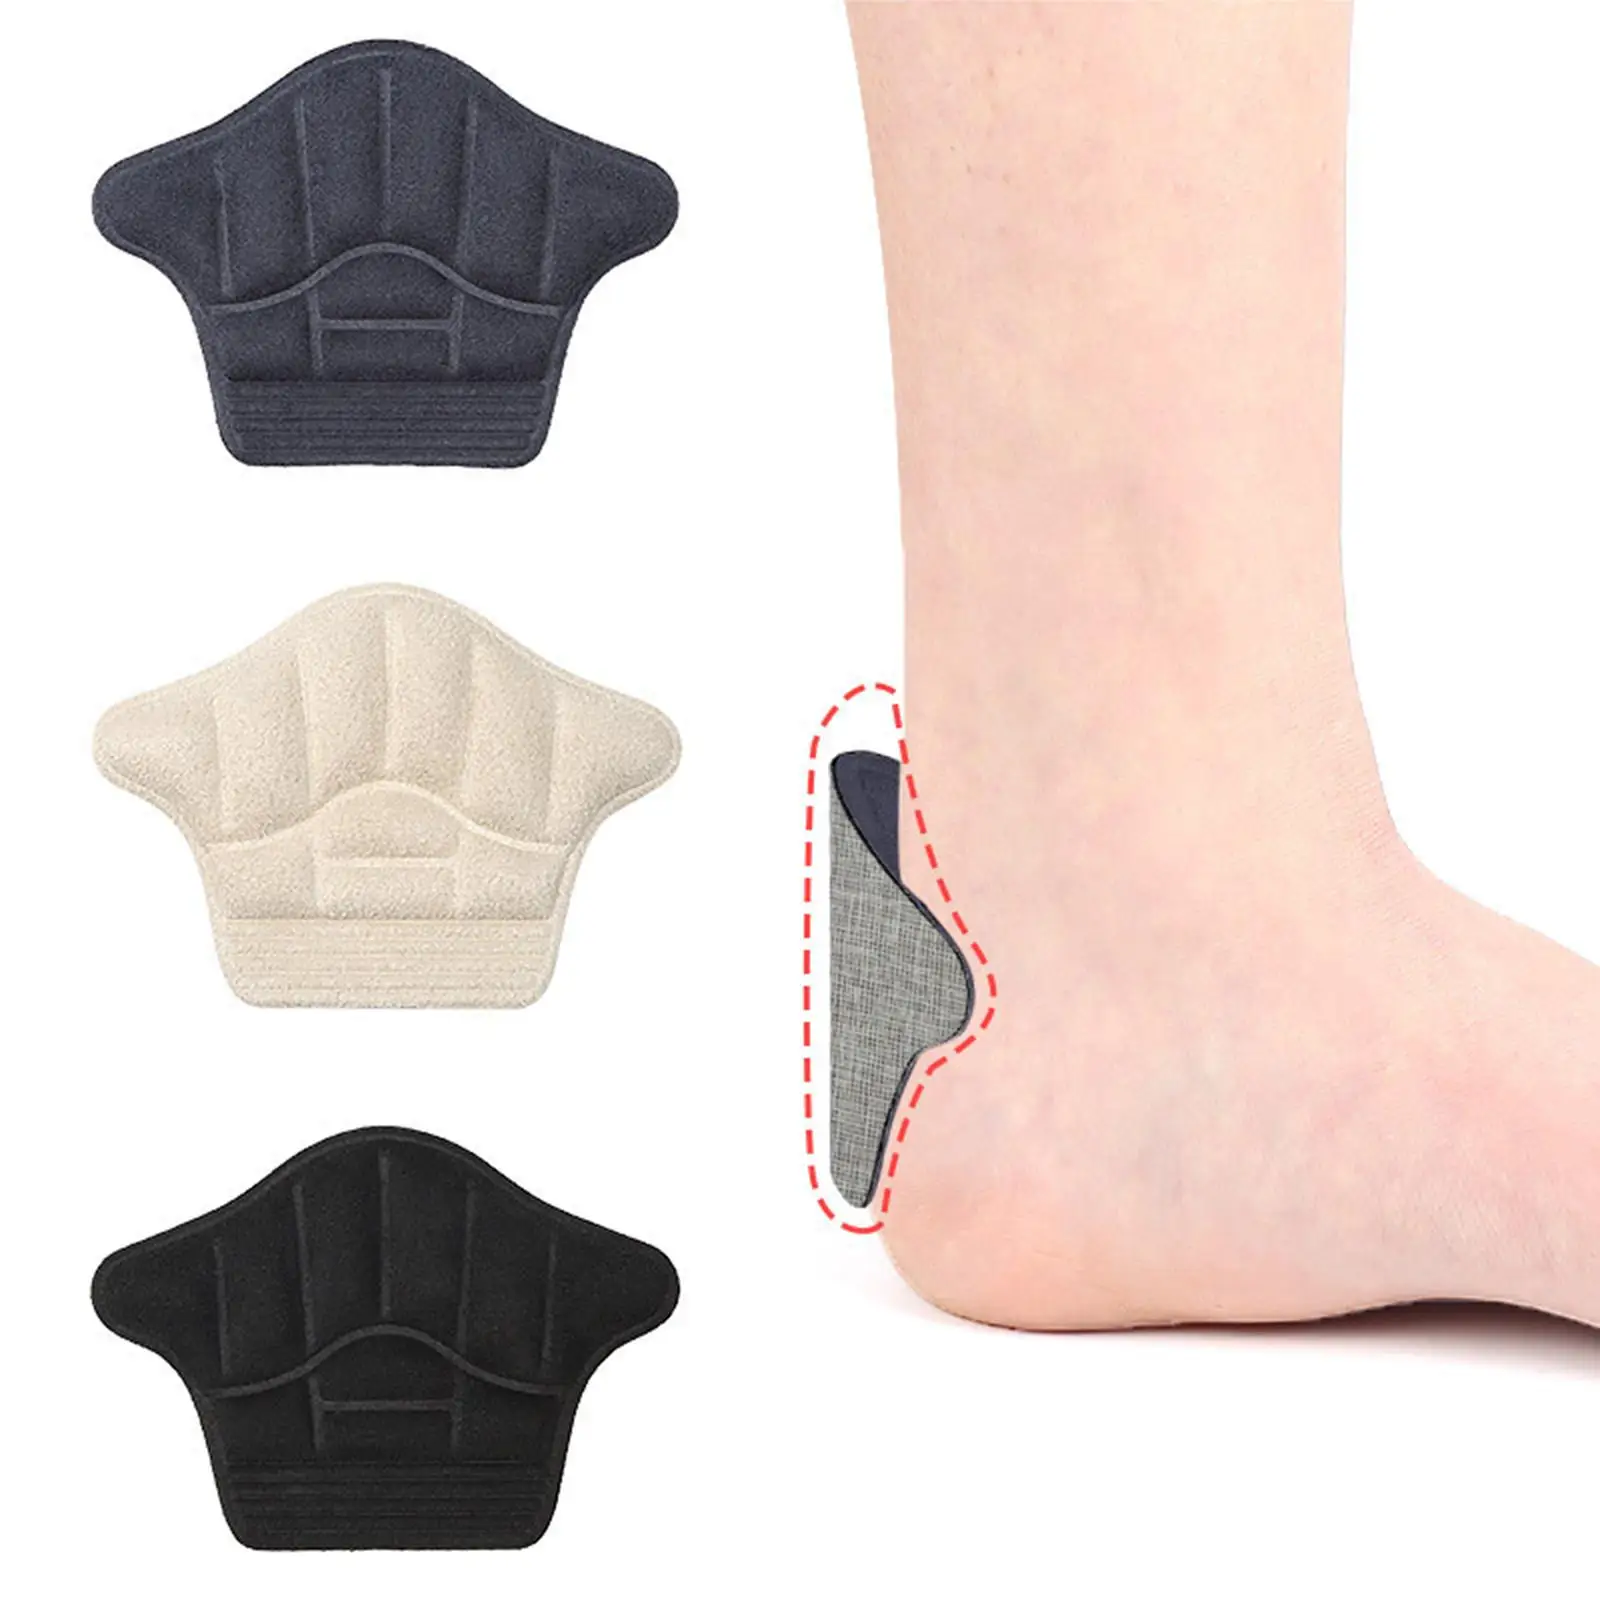 Shoes Heel Protectors Anti-Slip Self-Adhesive Heel Pads for Hiking Prevent Slipping